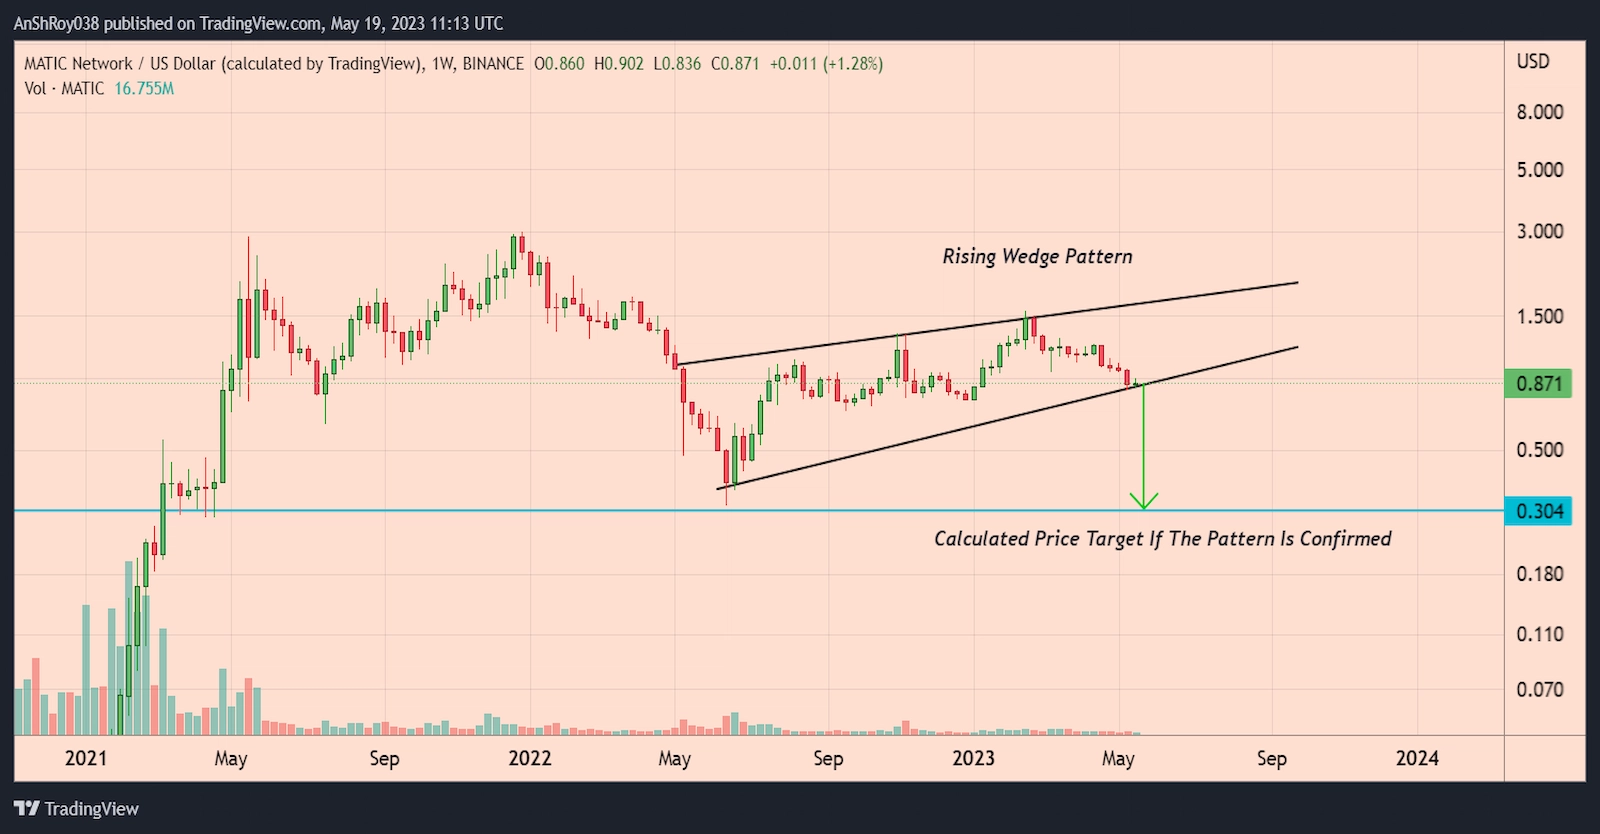 The price of MATIC is moving in a bearish pattern with a price target of -65%.